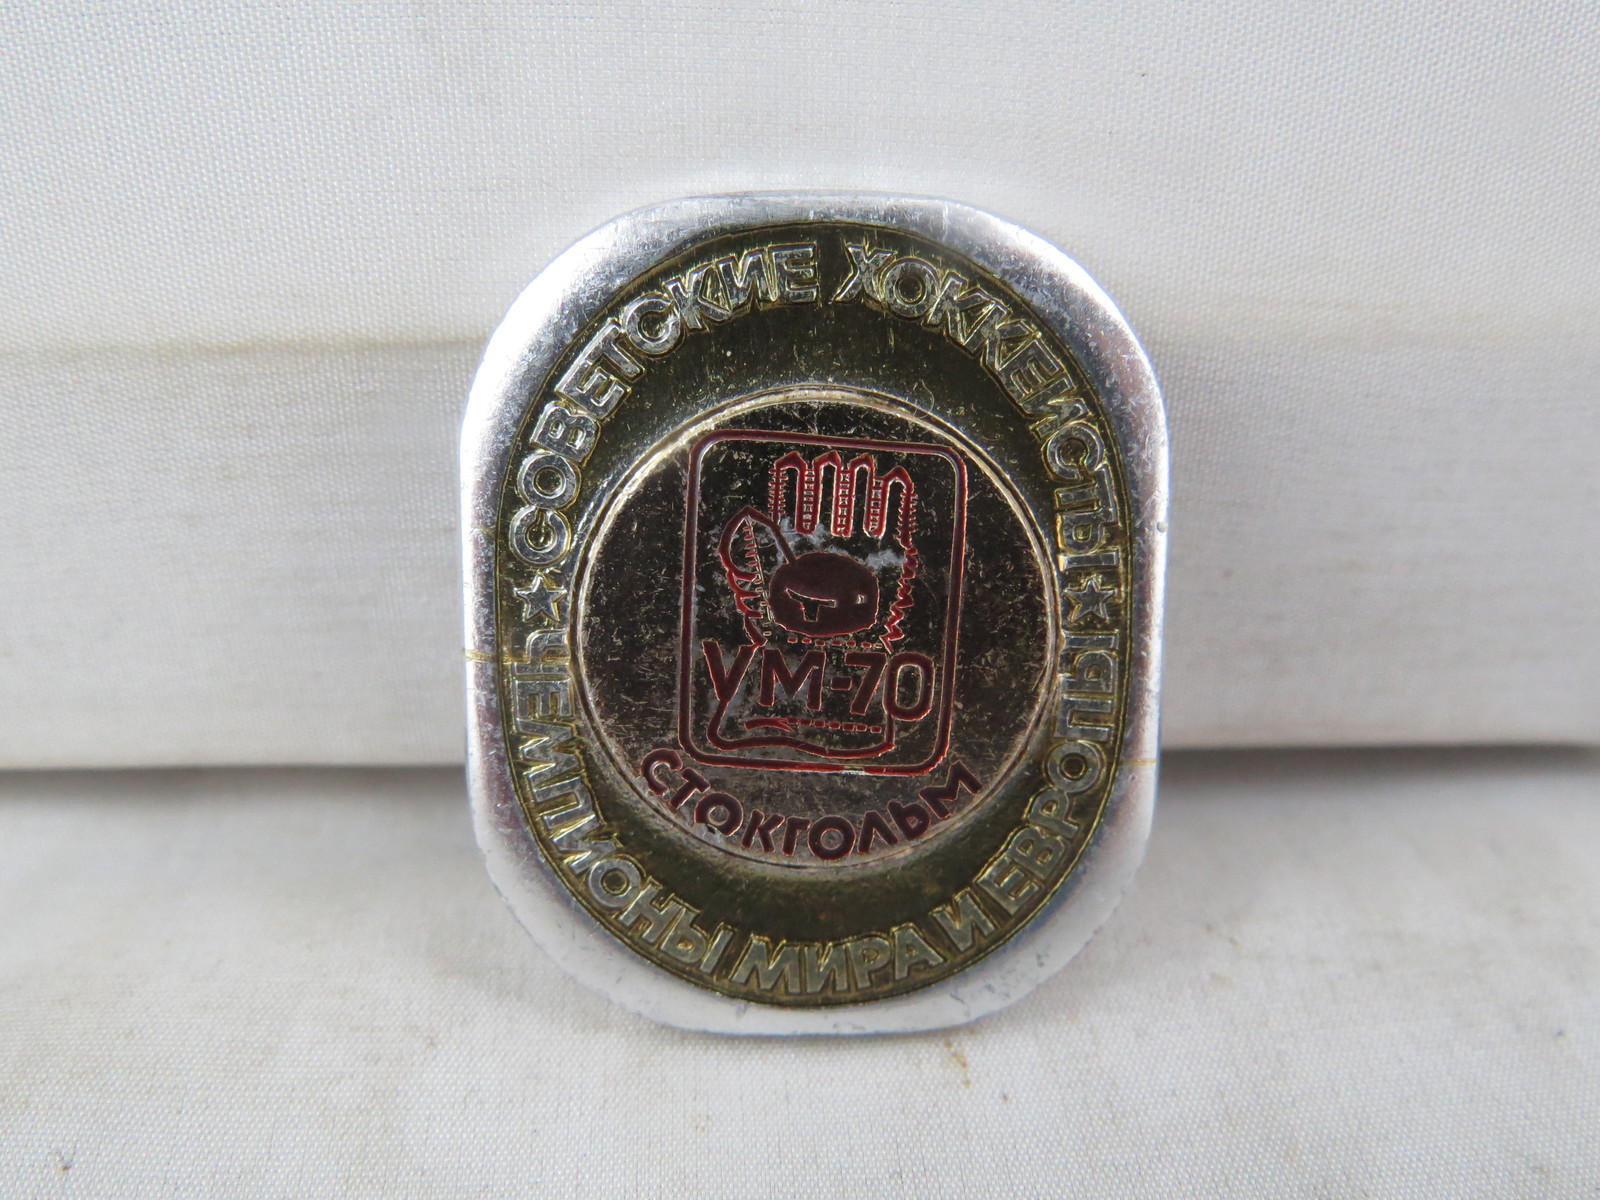 Primary image for Vintage Soviet Hockey Pin - 1970 World Champions - Stamped Pin